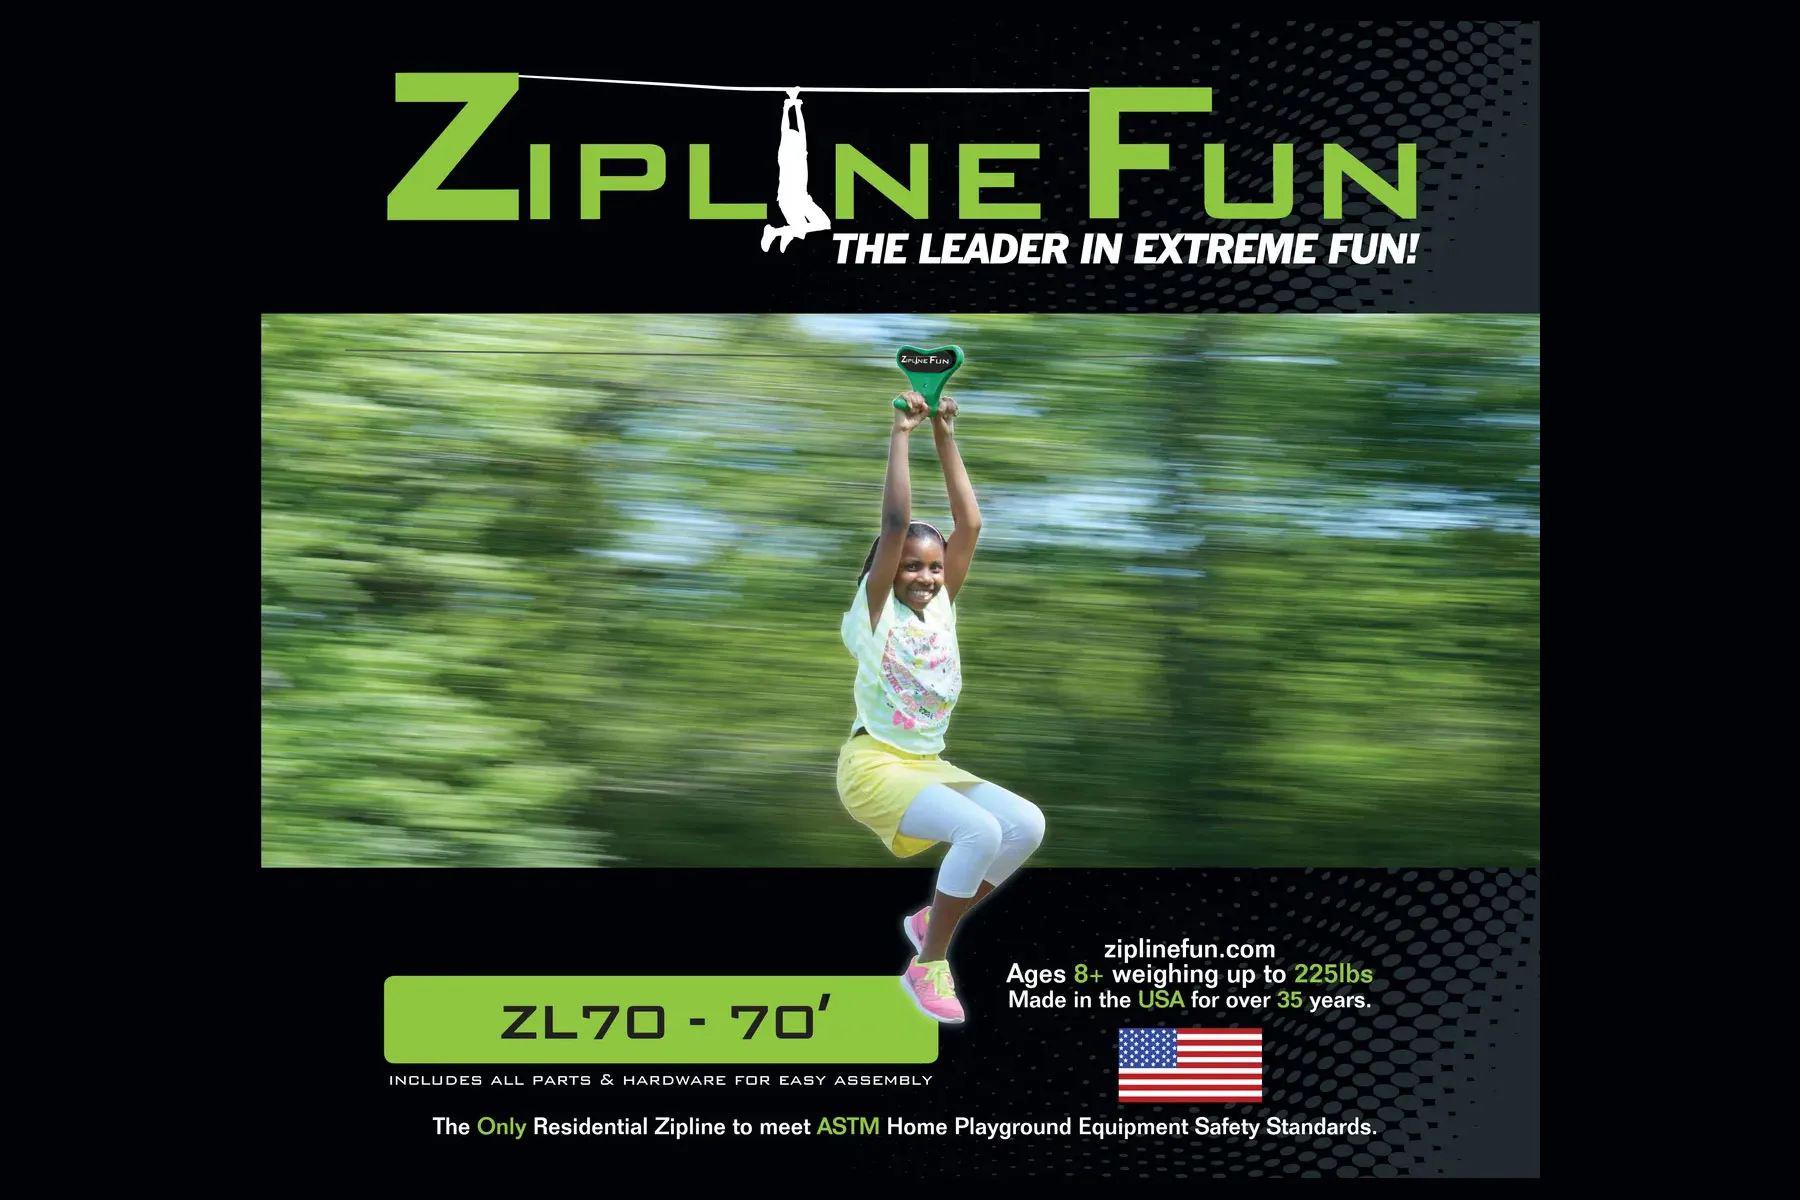 The best Zipline Fun of all! The ZL70 – 70′ Zip Line is built with safety, durability and fun in min Happy Backyards Collierville (901)888-3523